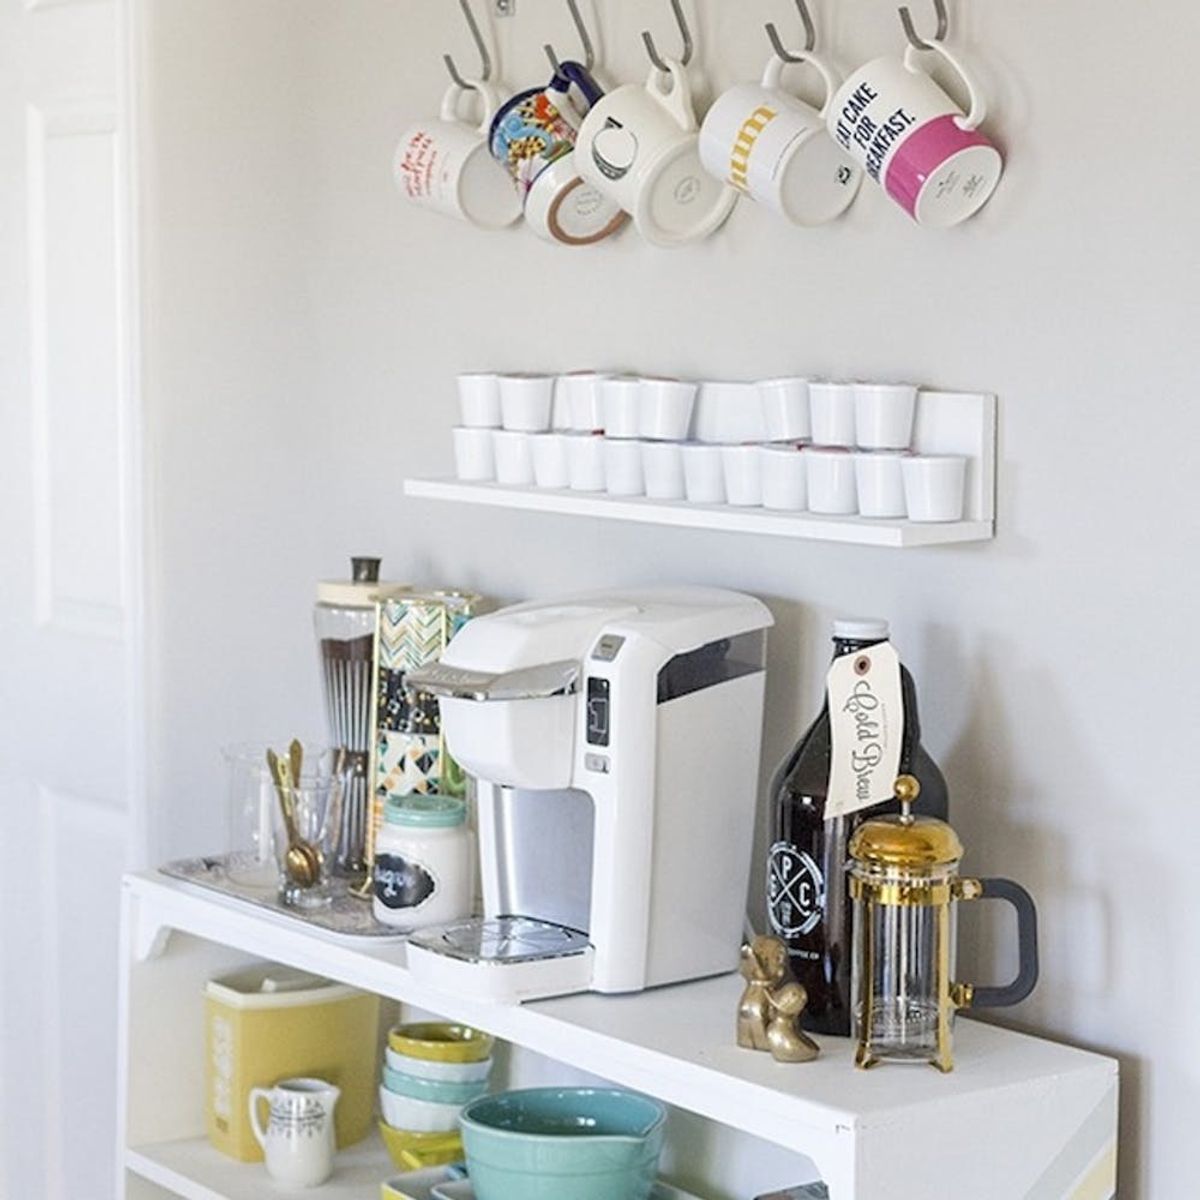 15 IKEA Hacks to Improve Your Morning Routine